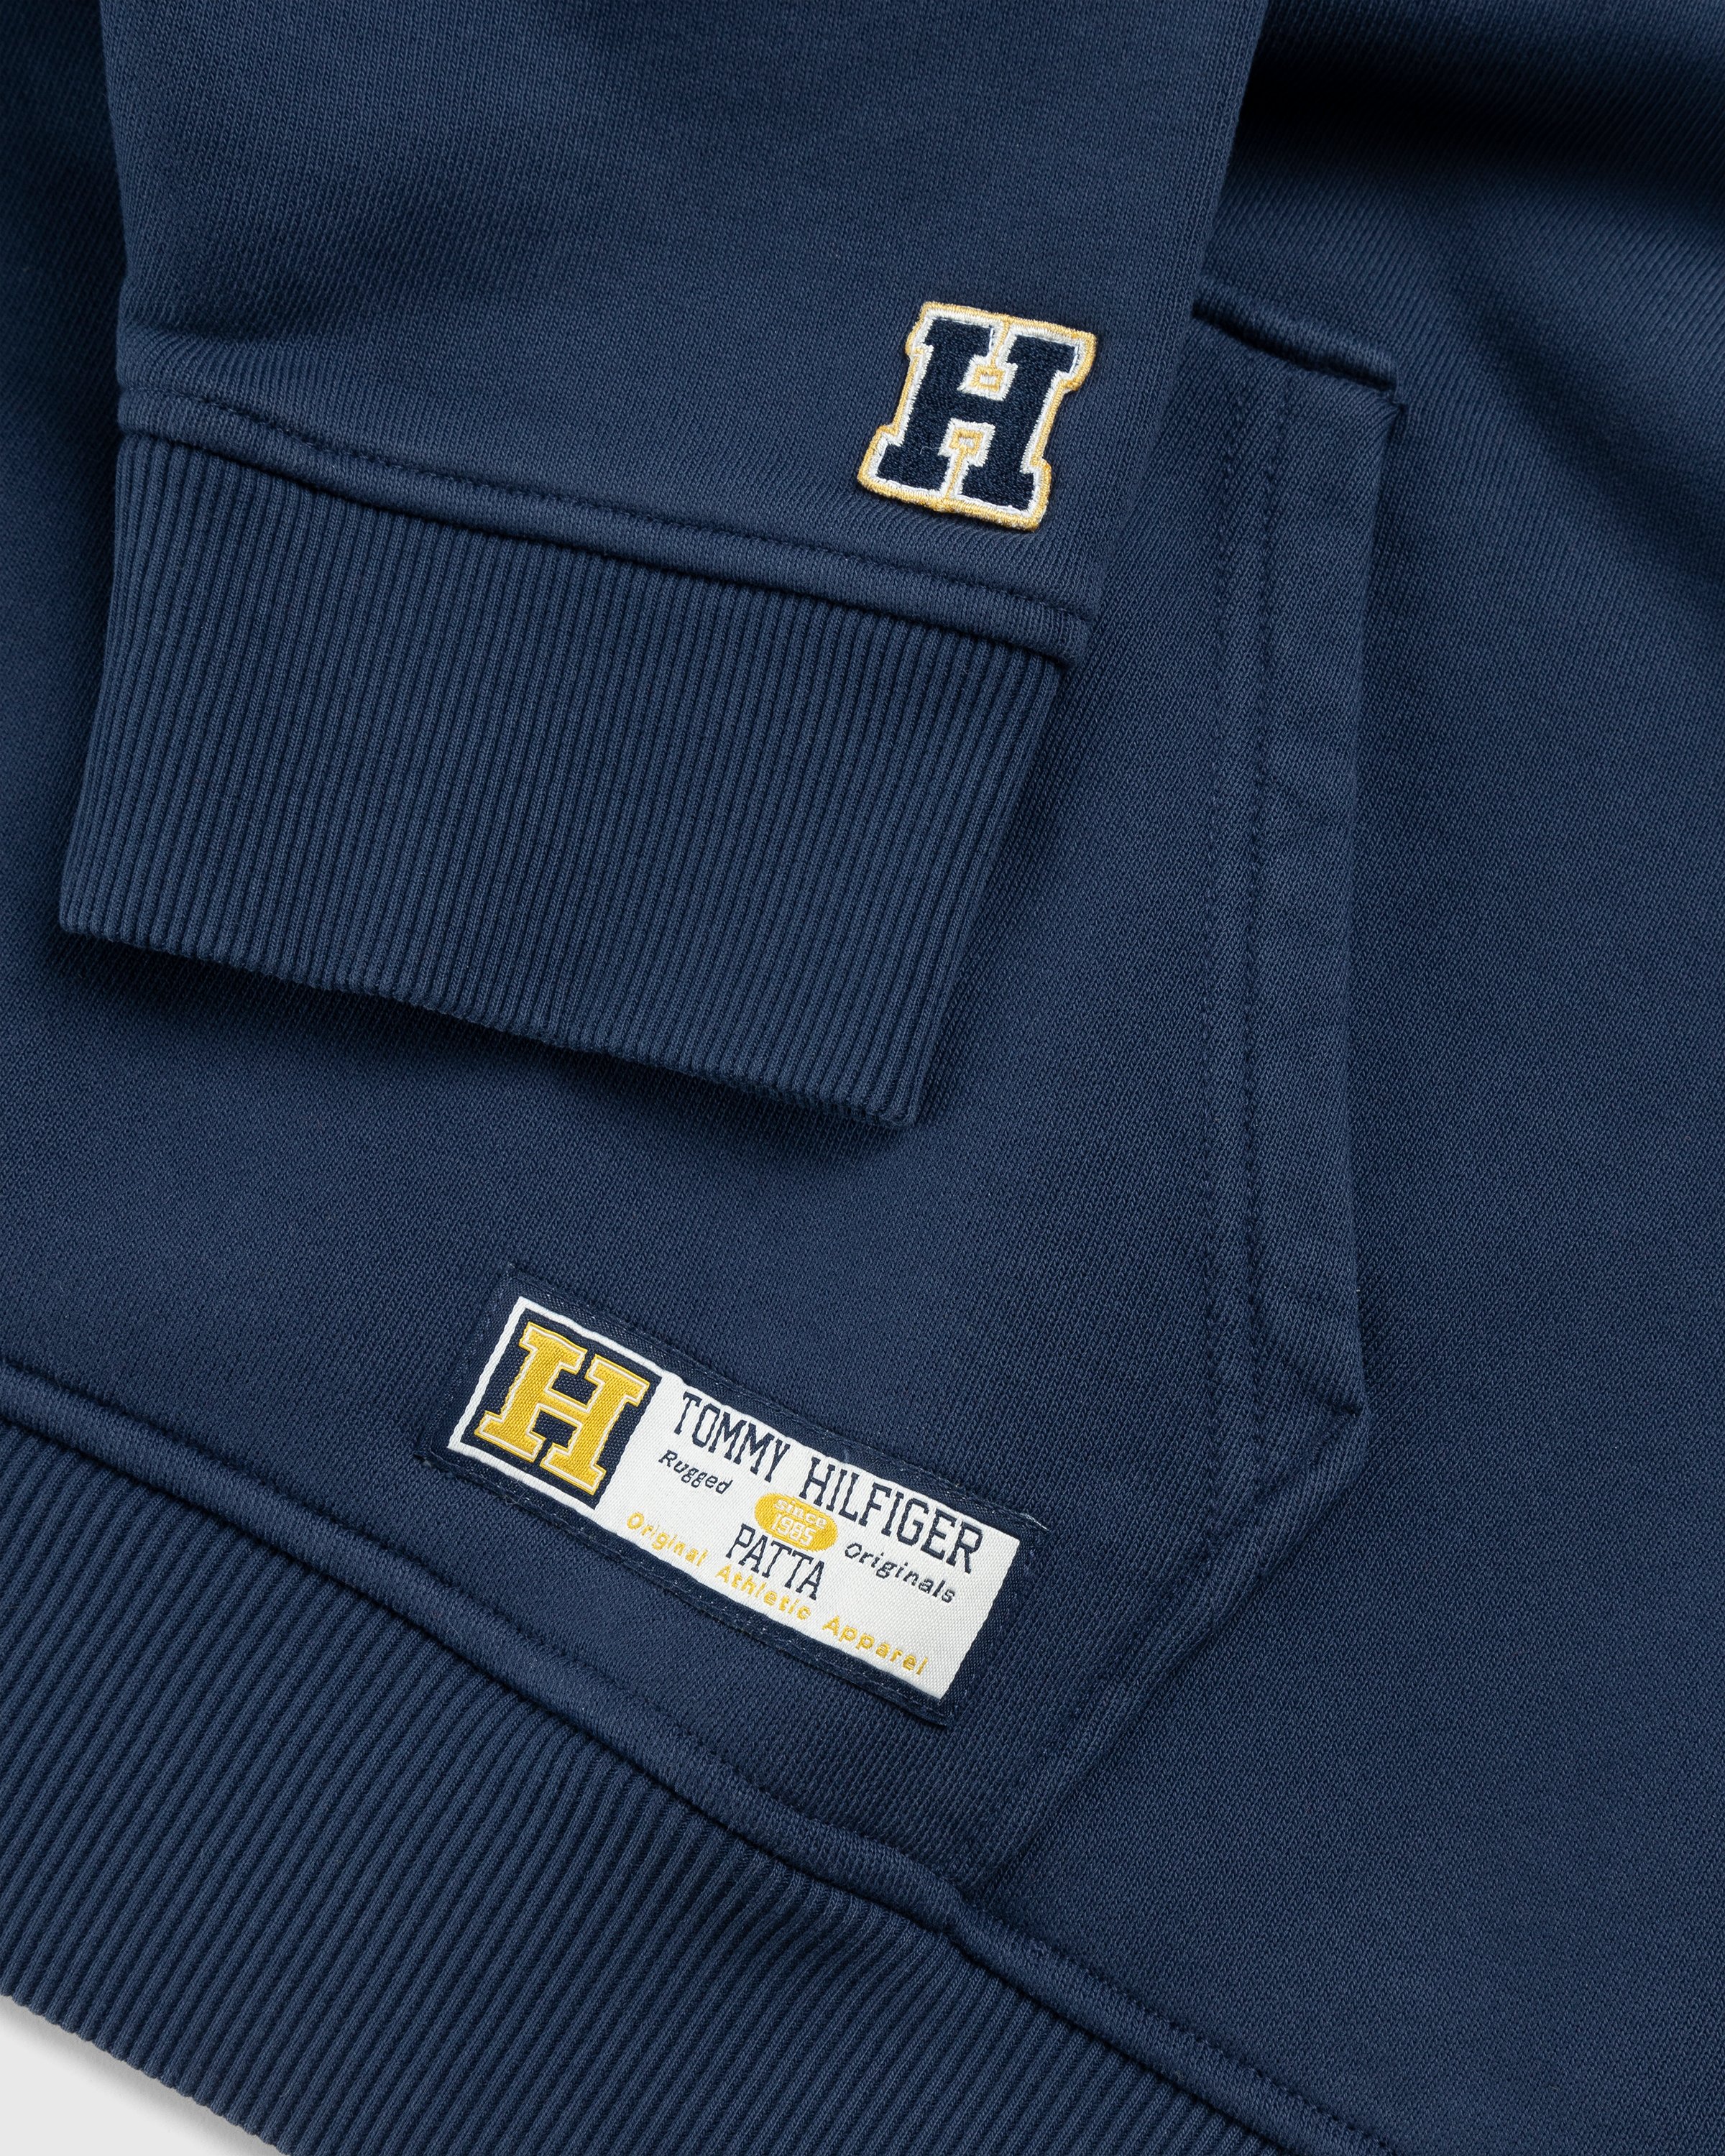 Patta x Tommy Hilfiger - Hoodie Sport Navy - Clothing - Blue - Image 5